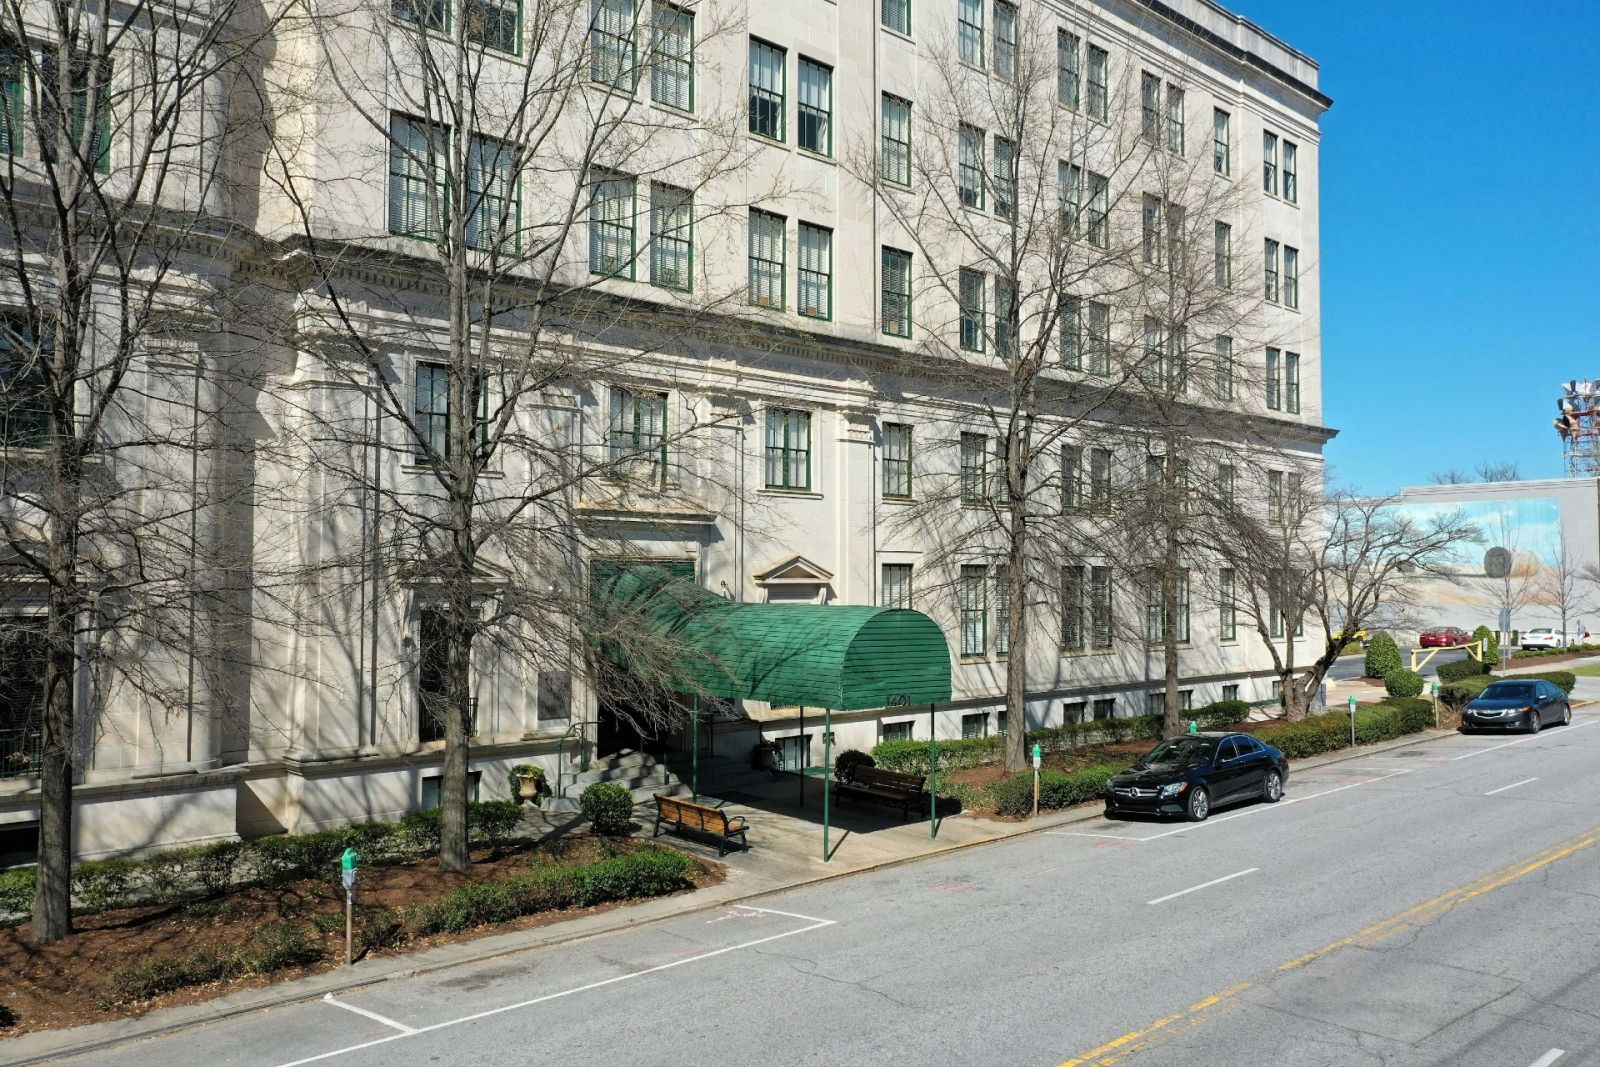 A 113-unit apartment property in downtown Columbia has sold for $17.45 million.  Land Bank Lofts, located at 1401 Hampton St., was purchased by Xsite Capital Investment LLC. (Photo/Provided)